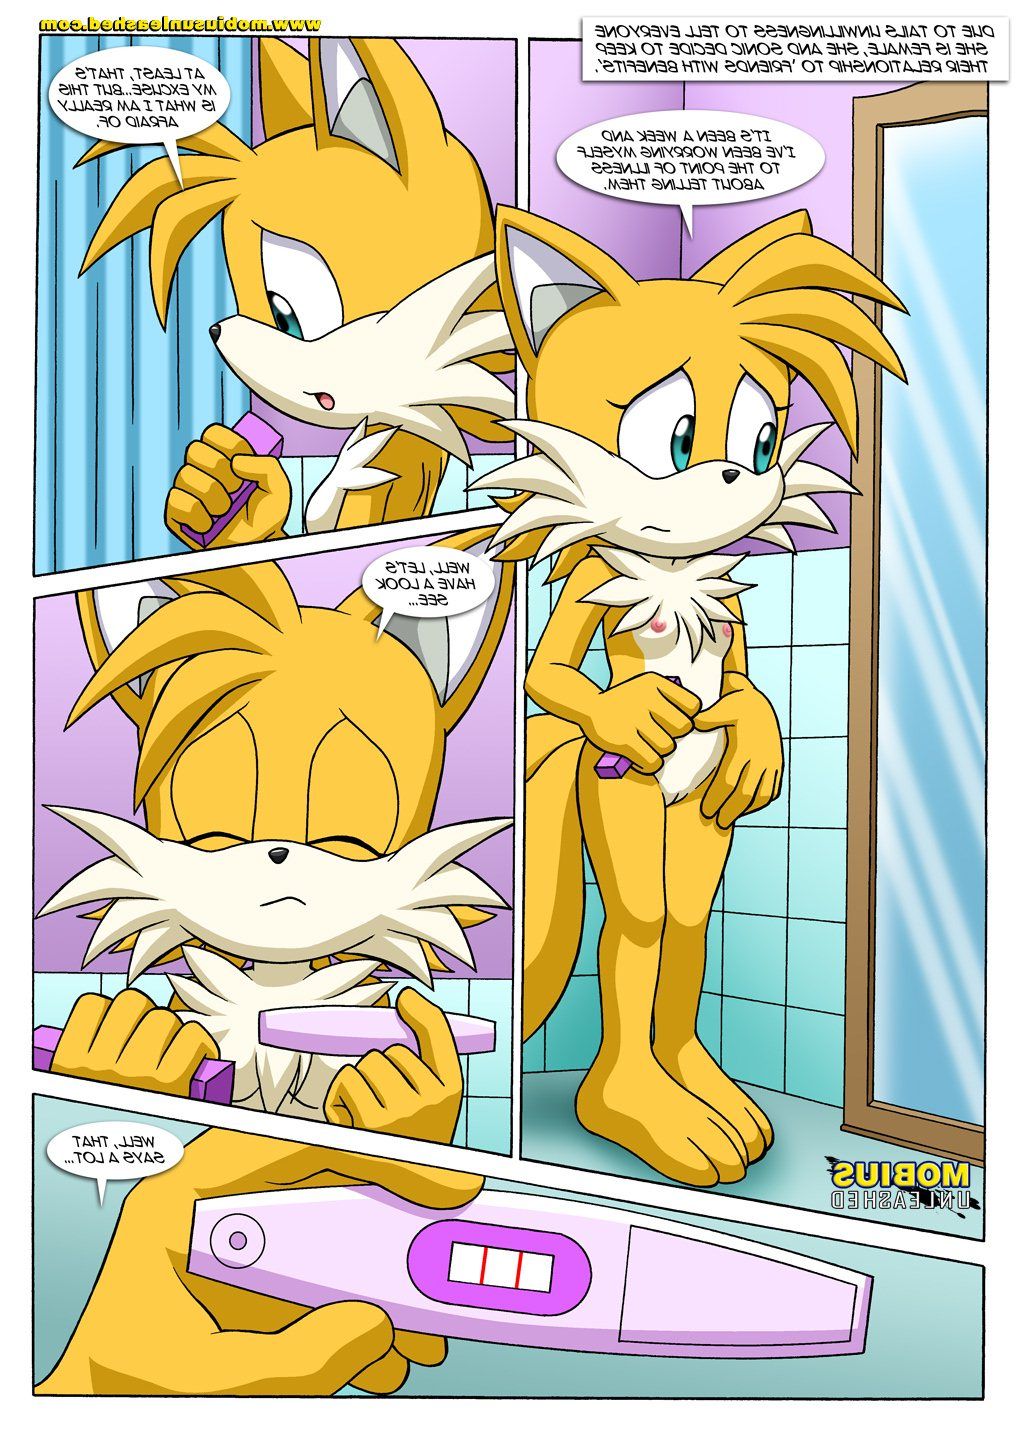 tails-tales-2 image_13424.jpg